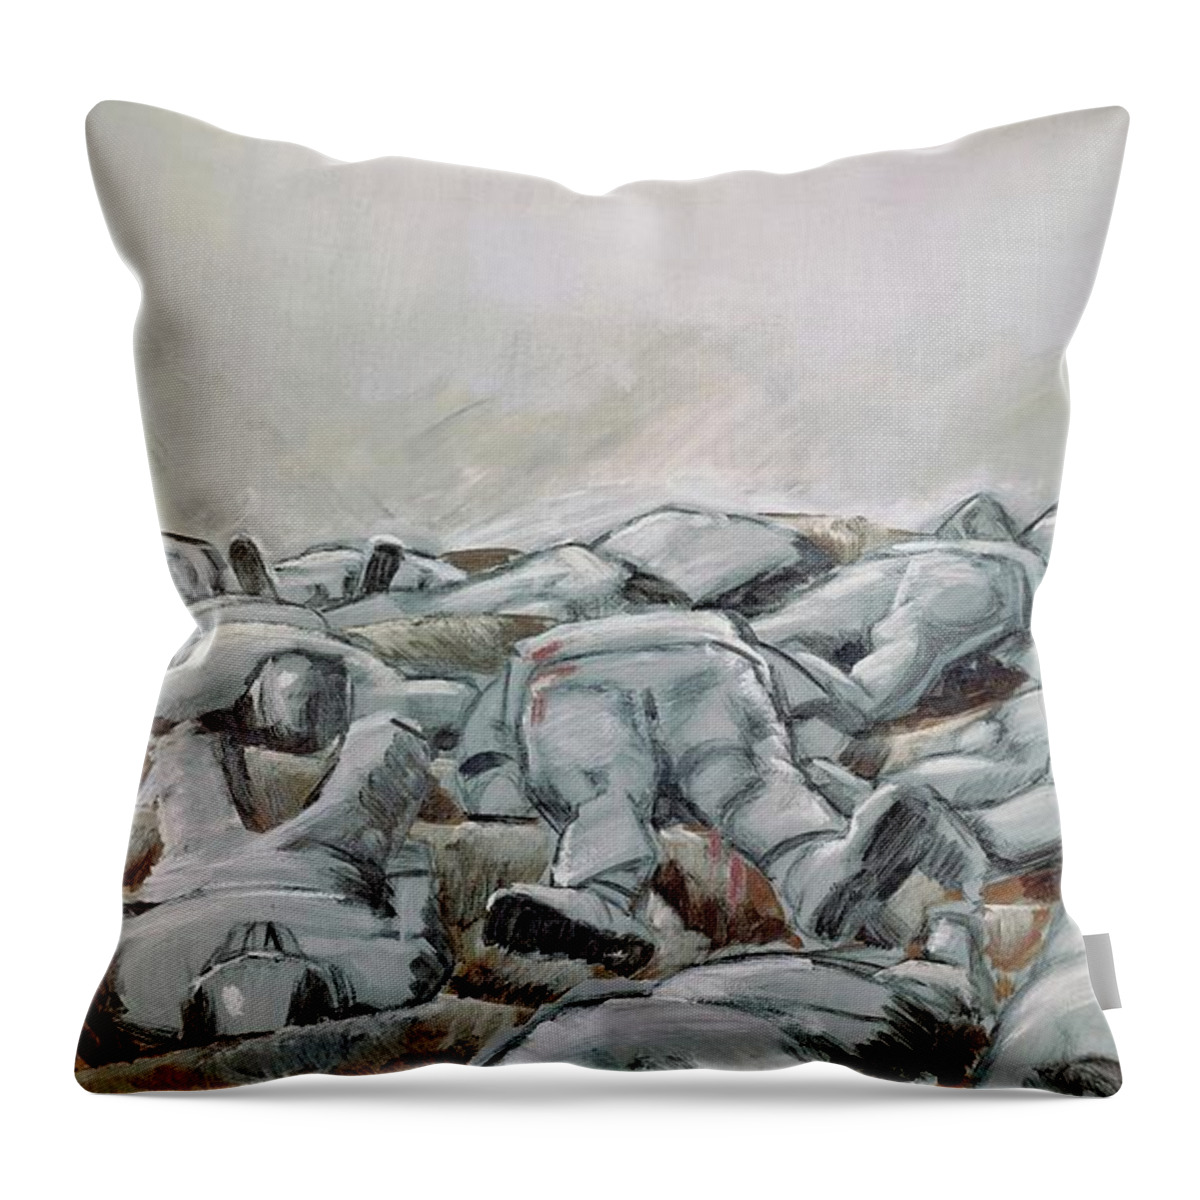 Albin Egger-lienz Throw Pillow featuring the painting Missa Solemnis. Oil on canvas -1916-. by Albin Egger-lienz Albin Egger-lienz